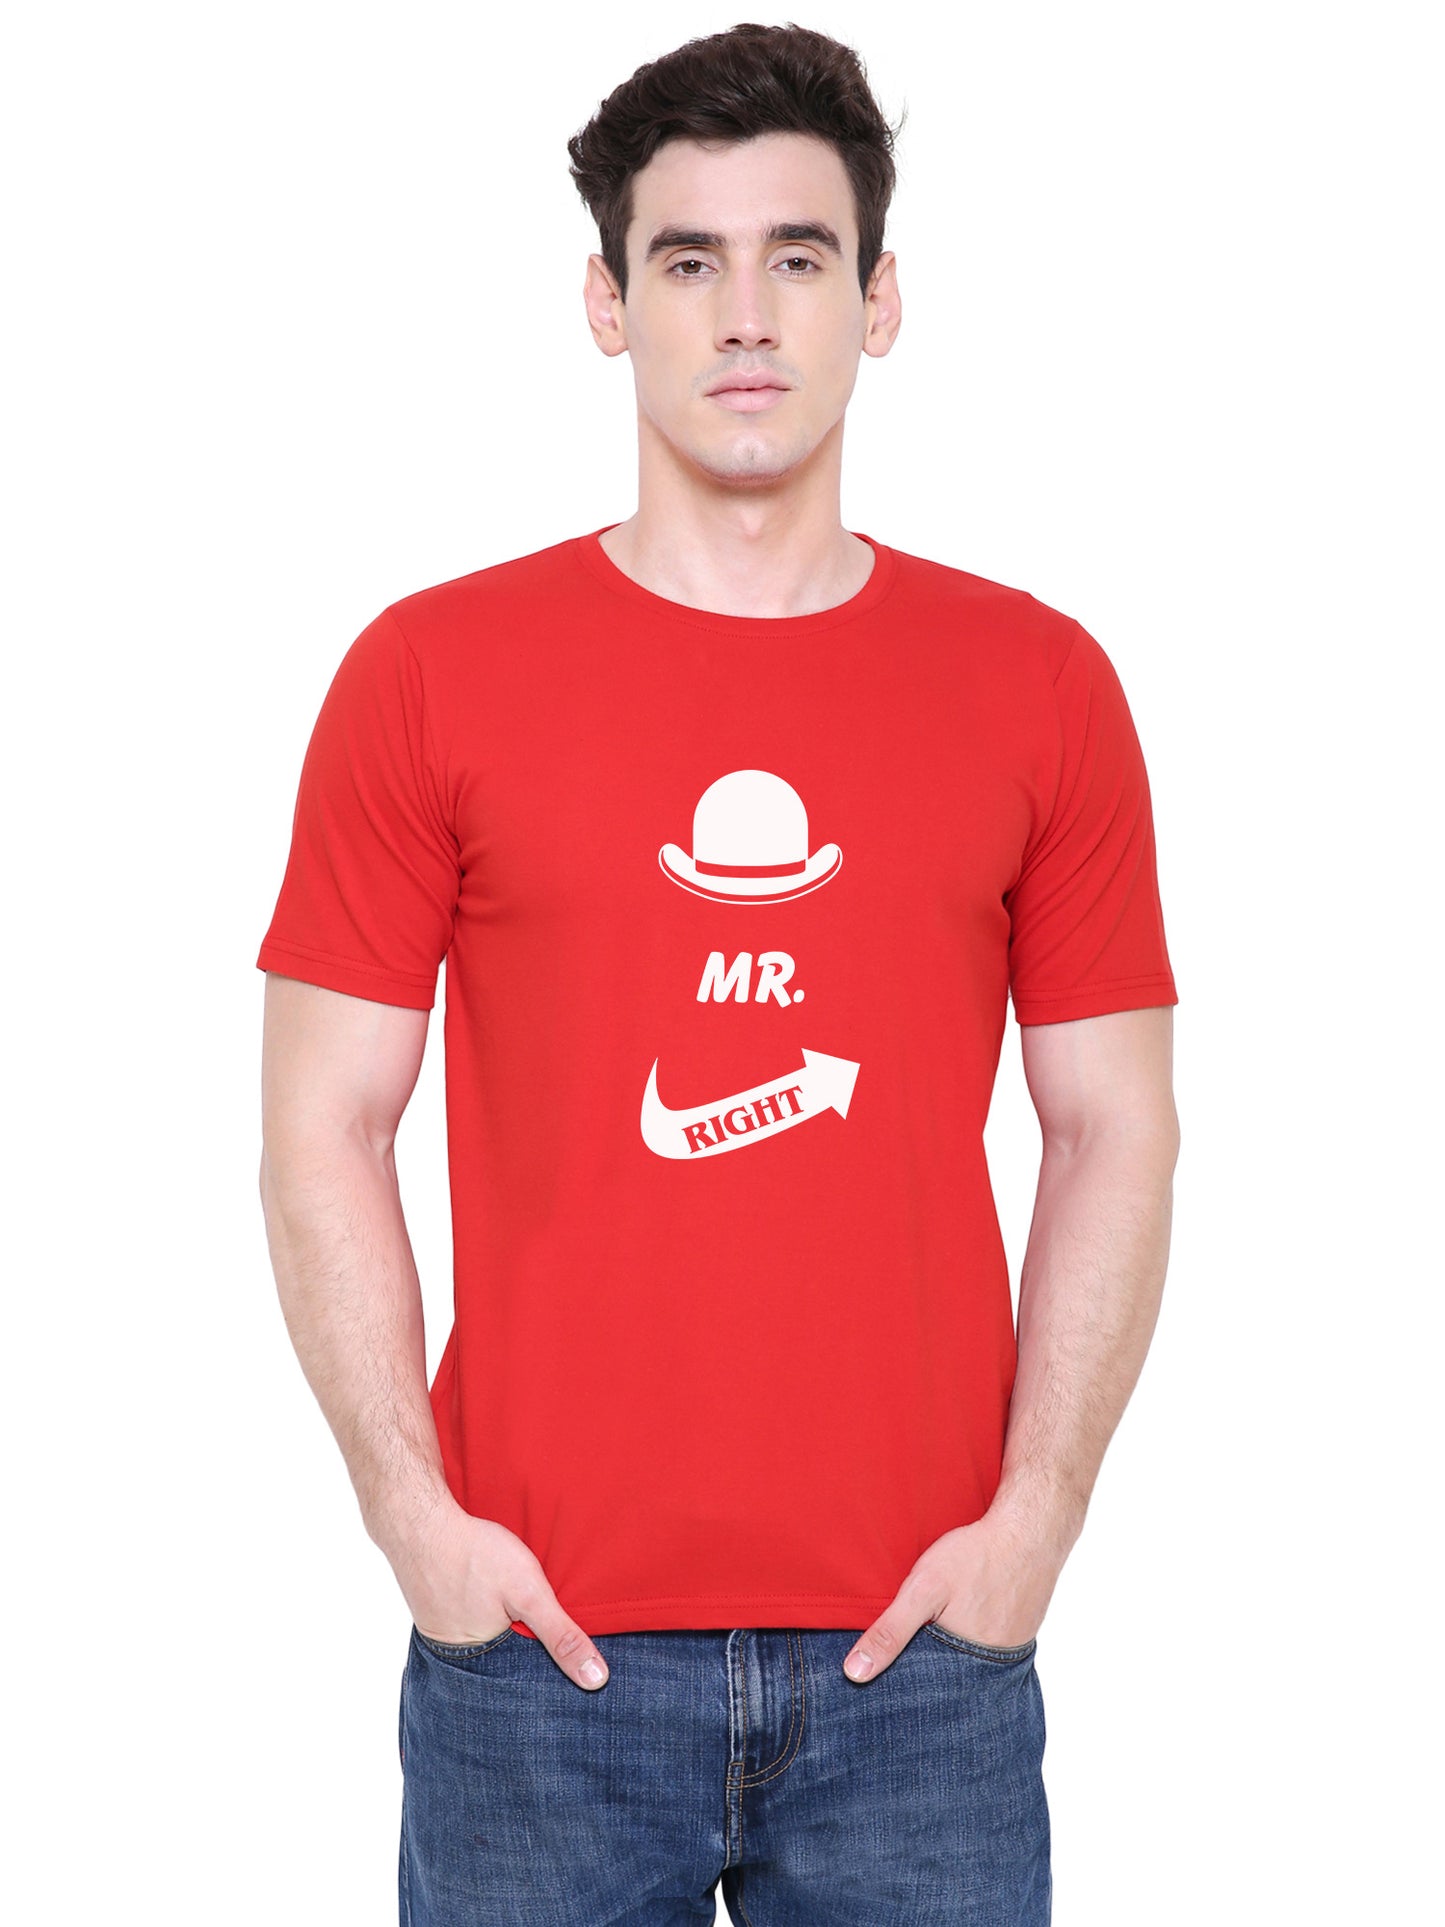 Mr. & Mrs. Right matching Couple T shirts- Red